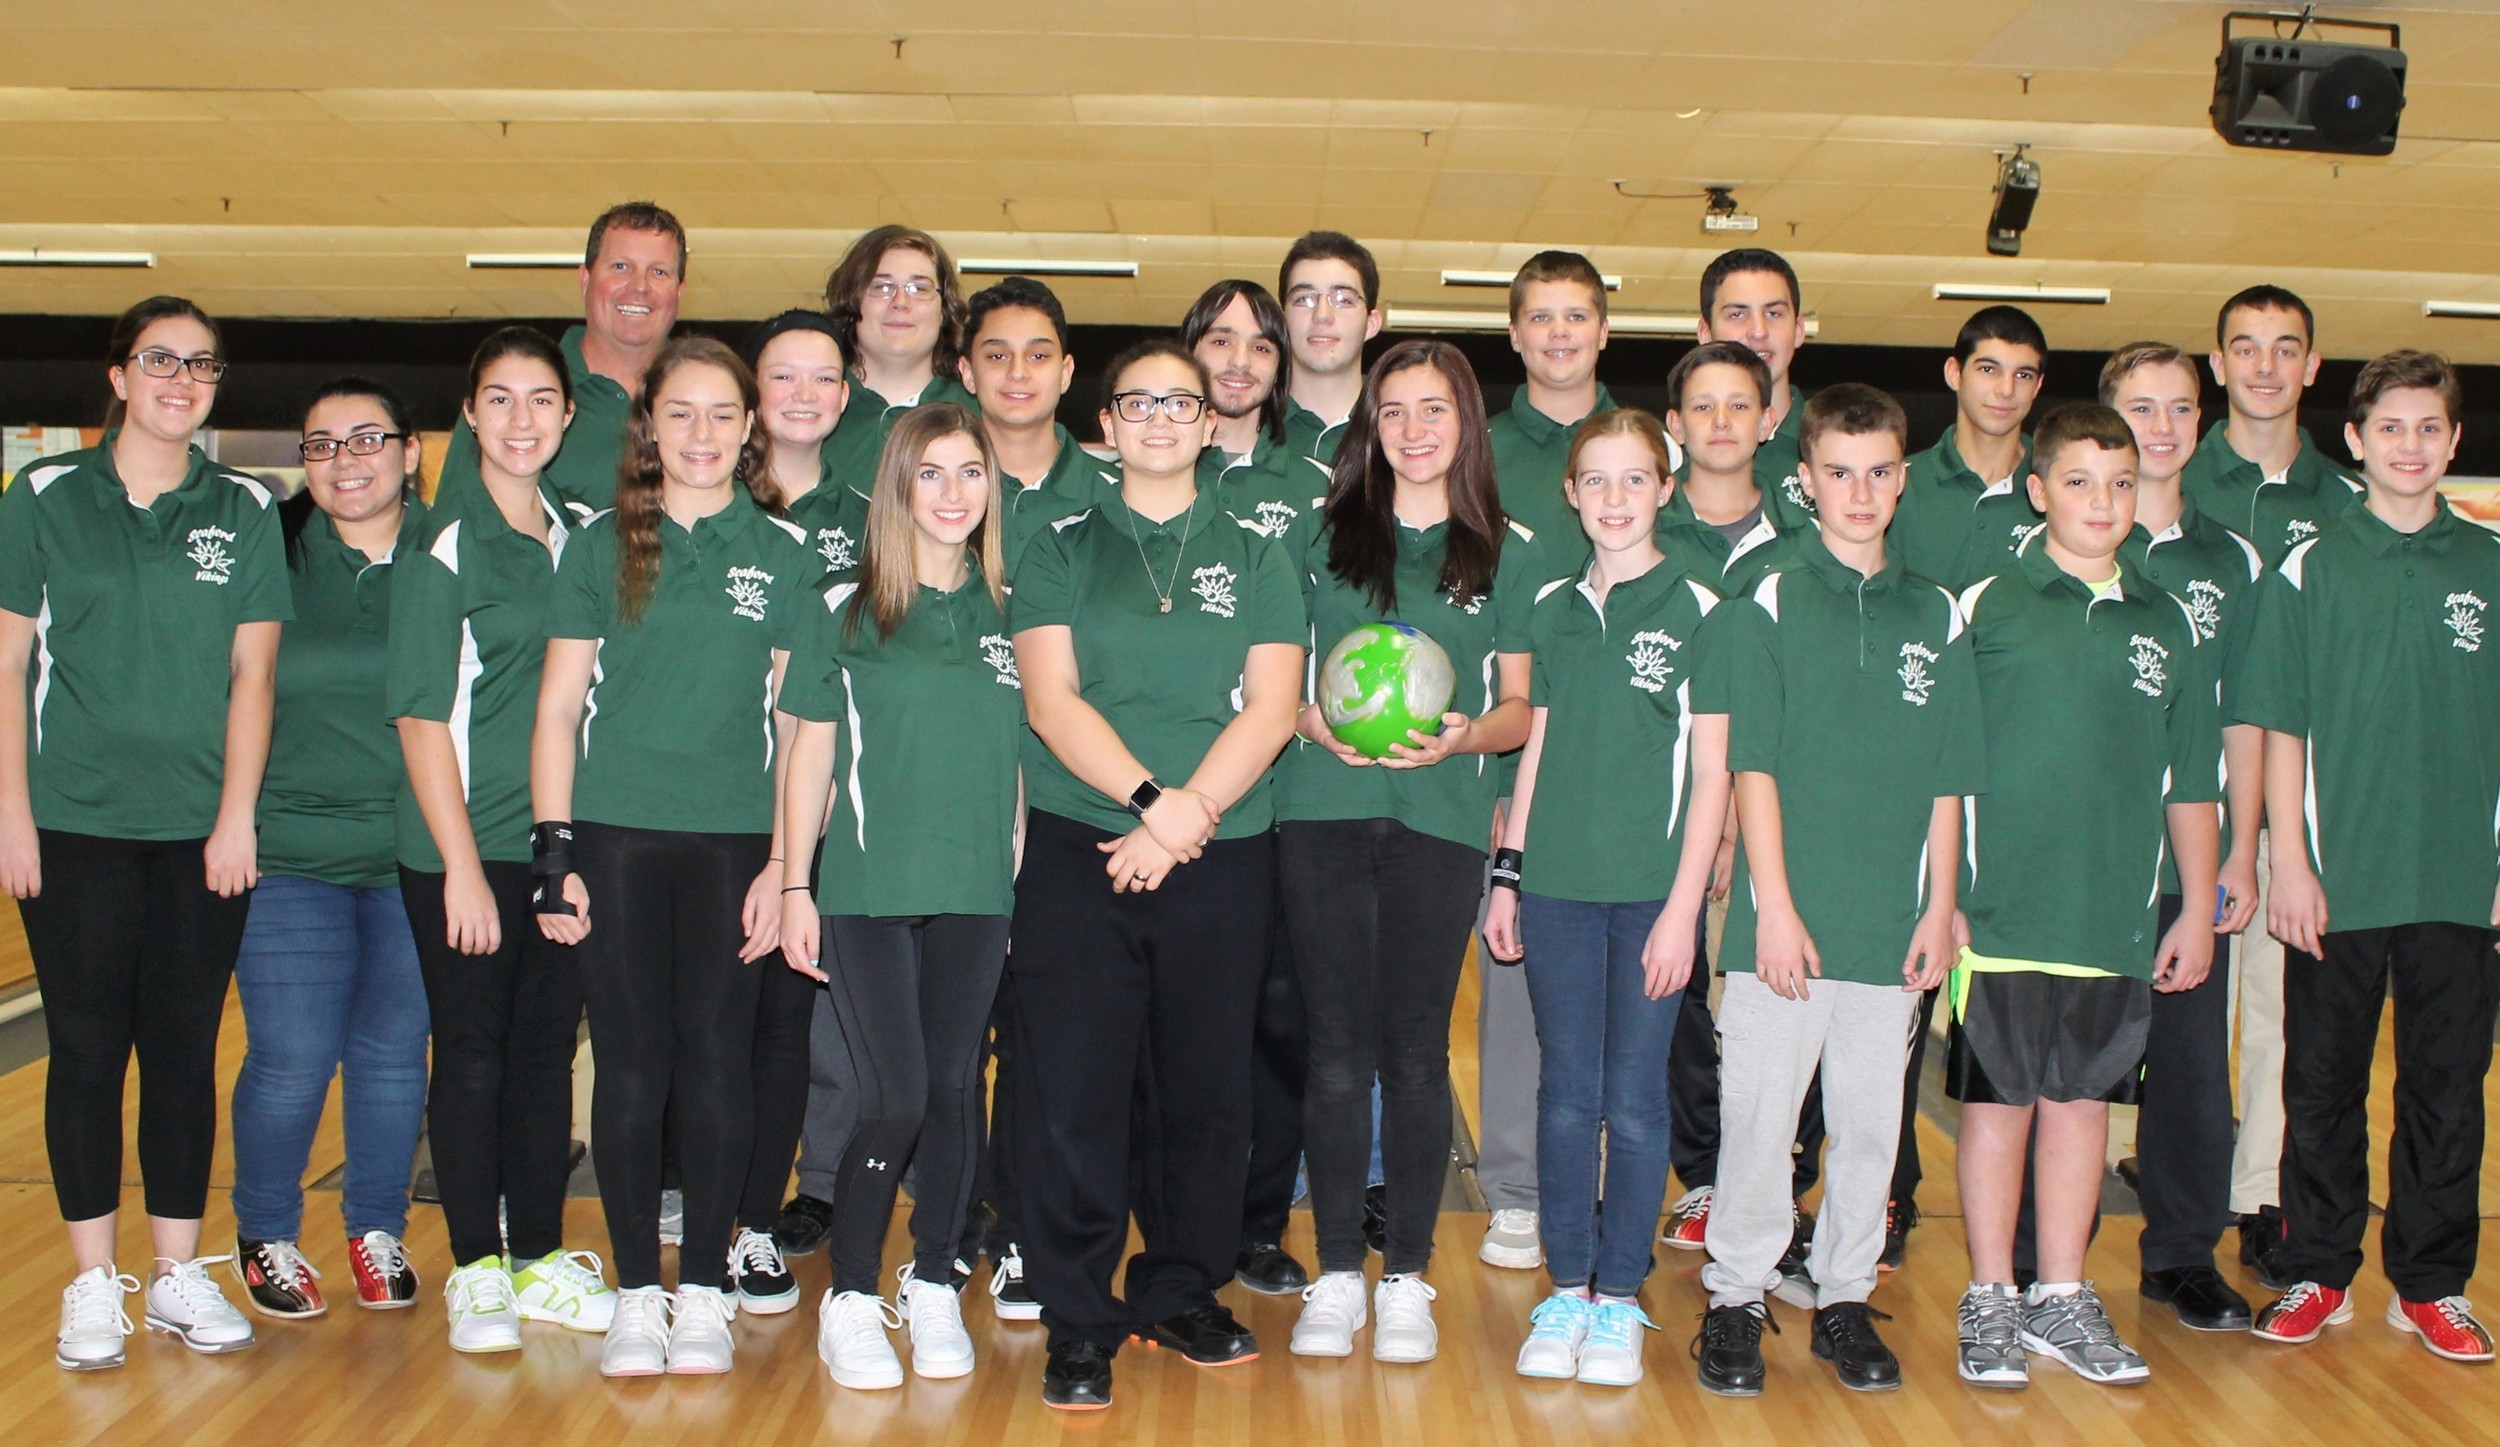 Coaches and parents said they were impressed by, and proud of, the success of the 23-member Seaford School District bowling team in its inaugural season.